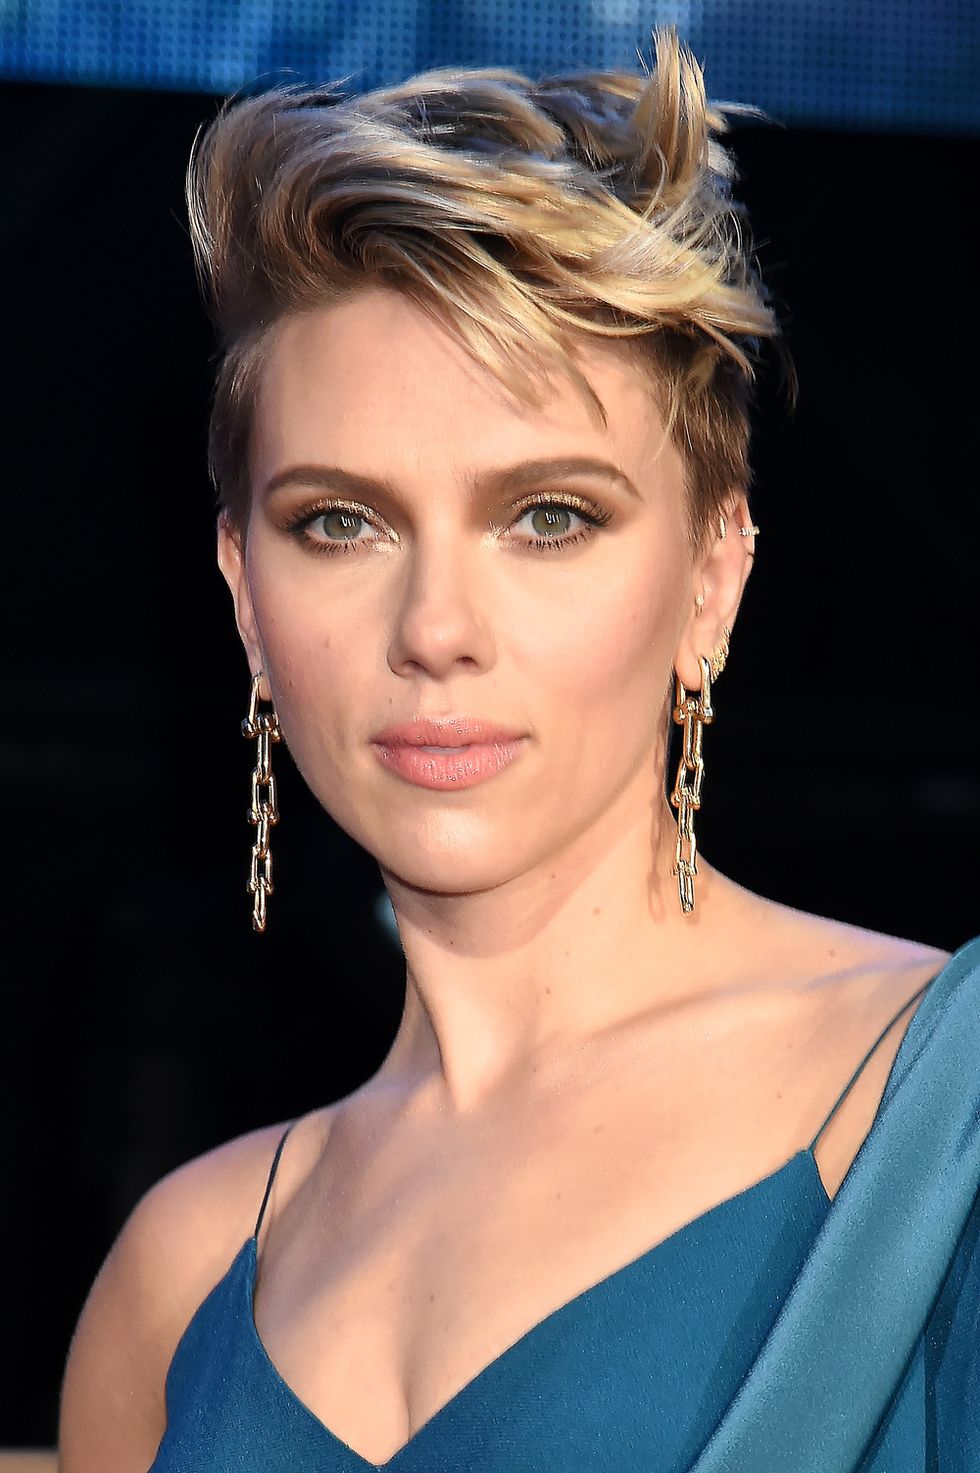 28 Celebrity Pixie Cut Styles To Inspire Your New Look